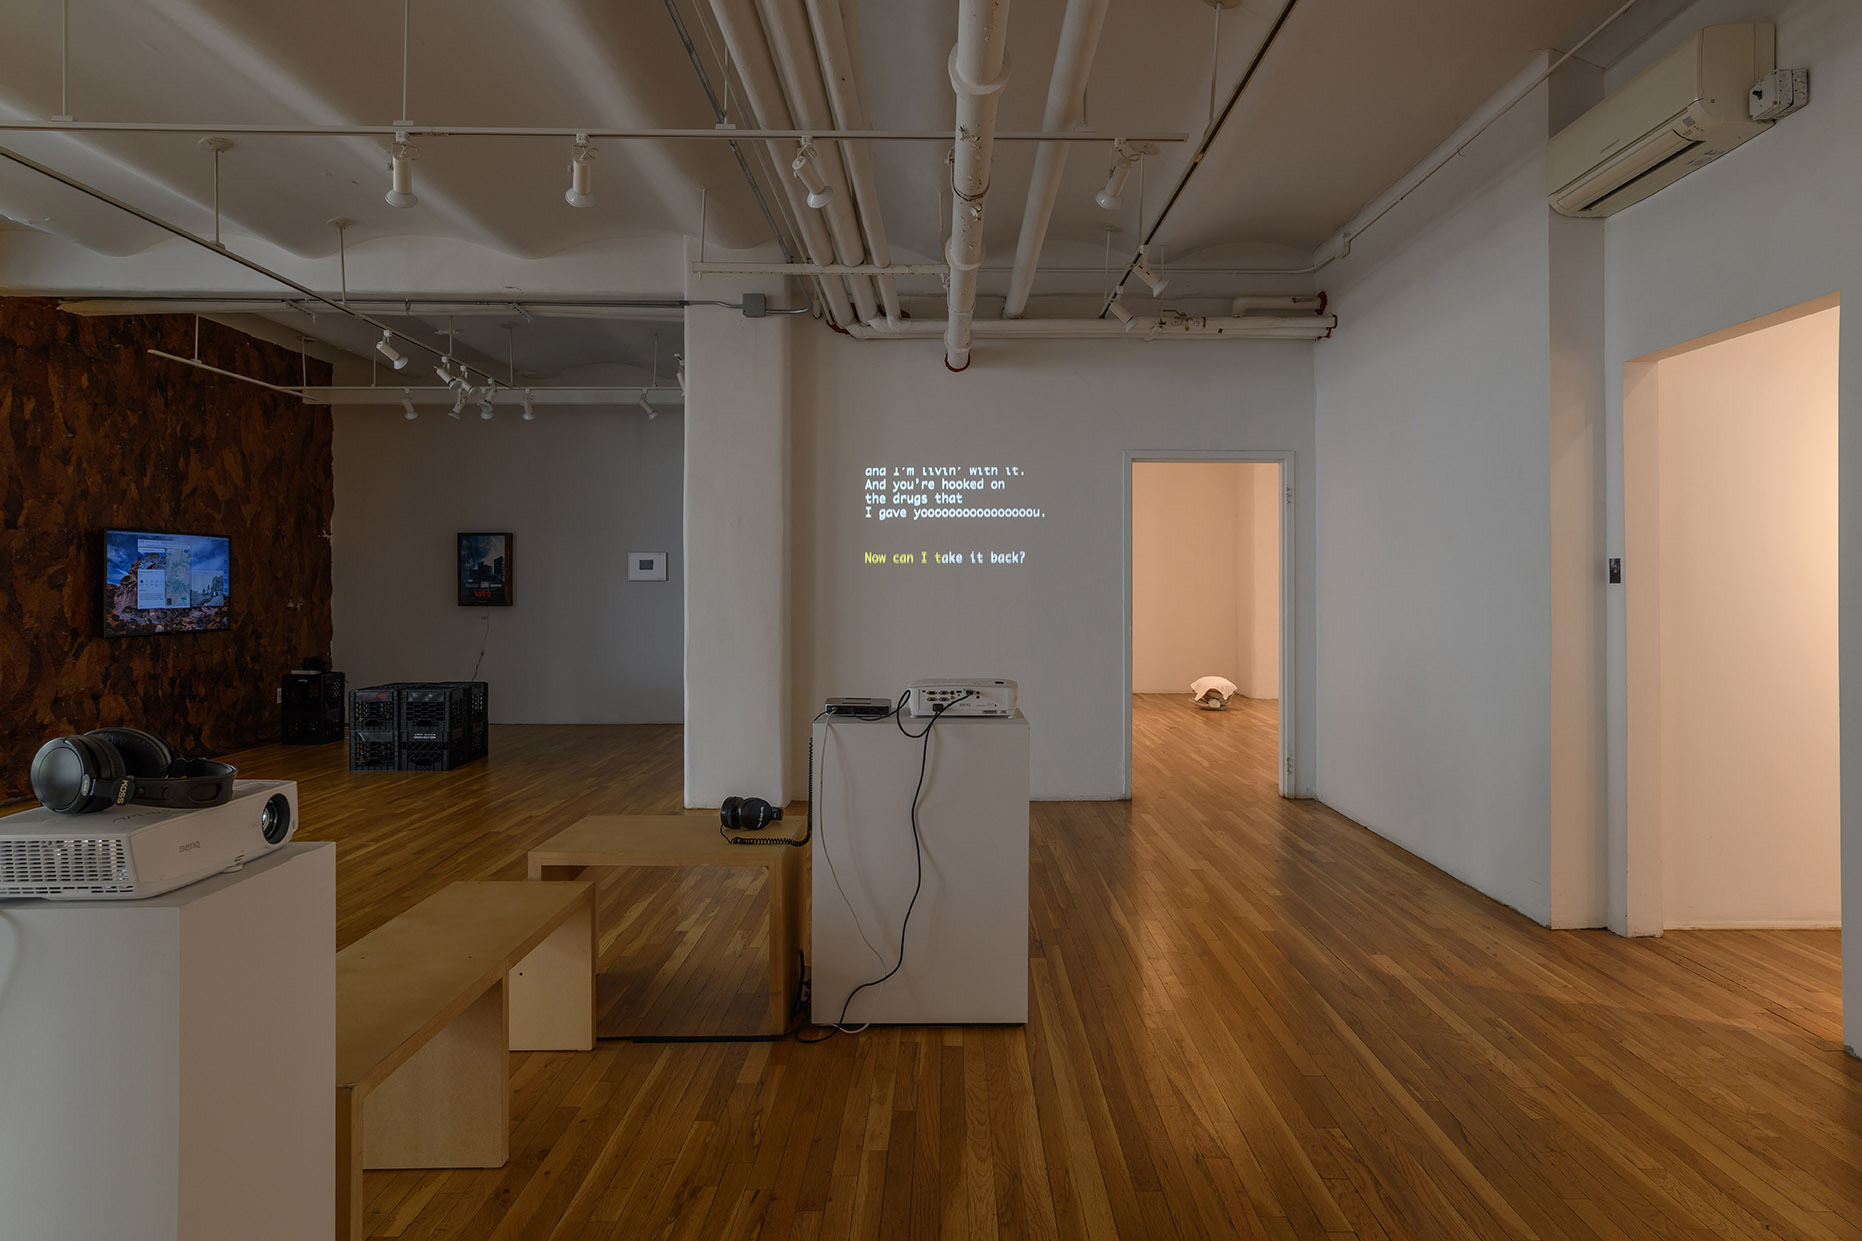 [Another view of the large open gallery facing the rear of the gallery space. The center of this view shows two white plinths, each supporting a projector, cabling, and headphones. Between the plinths are two benches stationed perpendicular to one another. Farthest from the plinths and benches is a large, dimly lit alcove featuring sculptures on the floor and wall, a drawing, and a lit TV monitor. To the right of this alcove is a video projected onto a short wall connected to one of the illuminated doorways. Turning the corner is another white wall abutting another illuminated open doorway.]